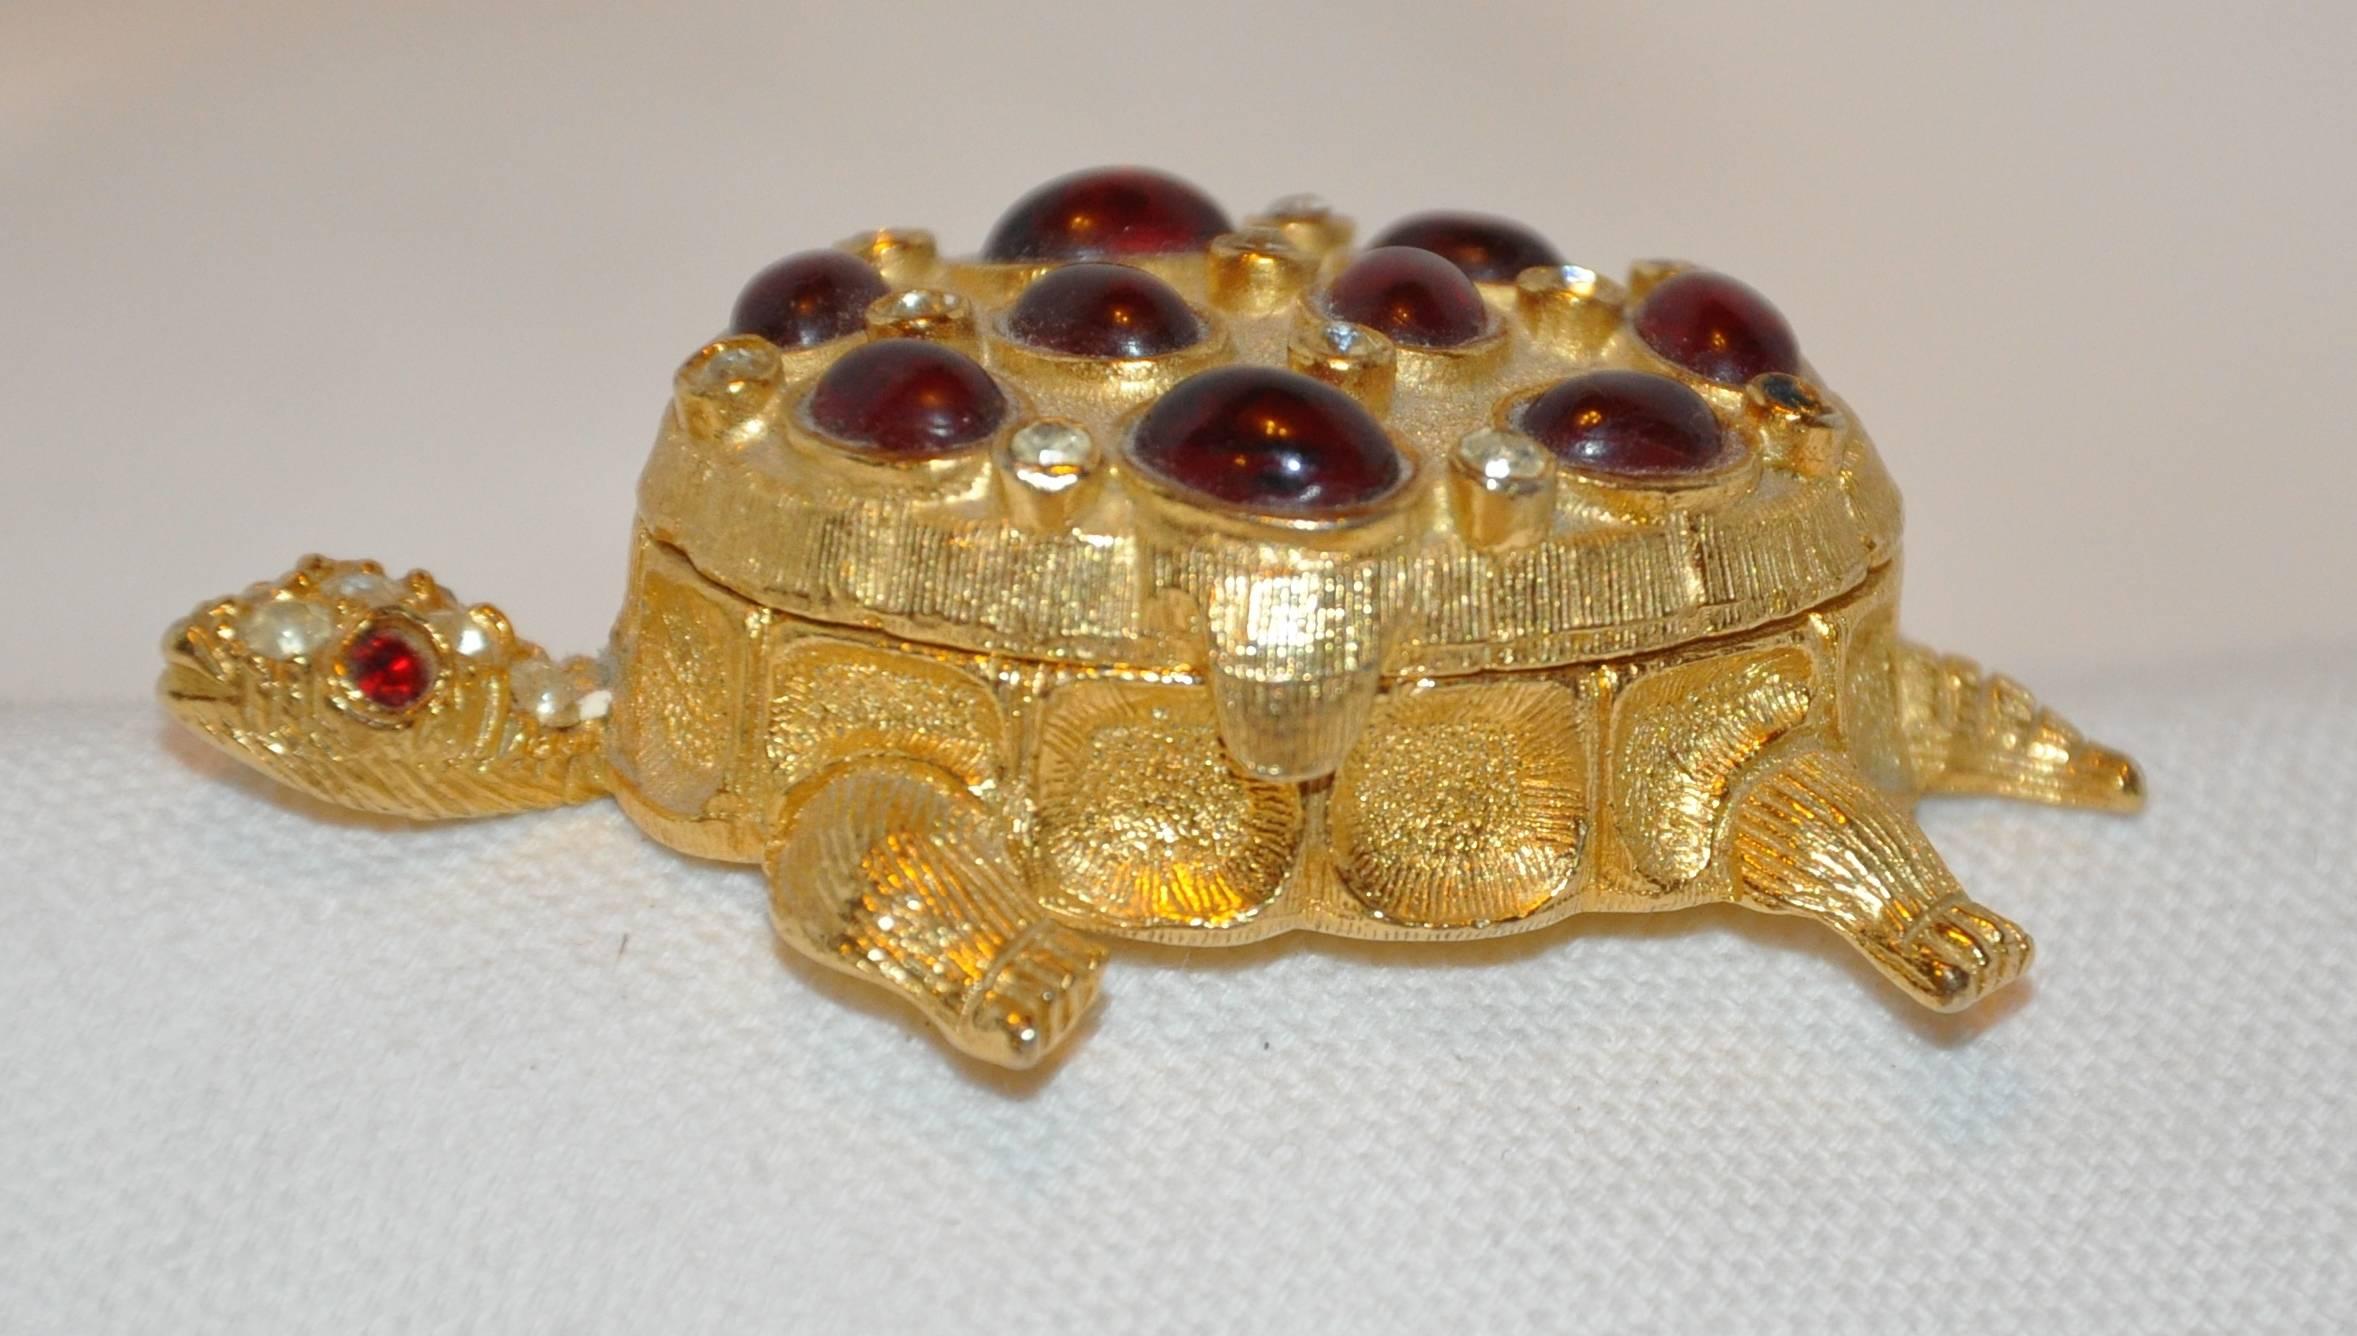        This wonderfully whimsical gilded gold vermeil finished "Turtle" pill box is accompanied with a micro thongs inside to use to pick the pills out instead of using your own fingers. The exterior is wonderfully accented with detailed